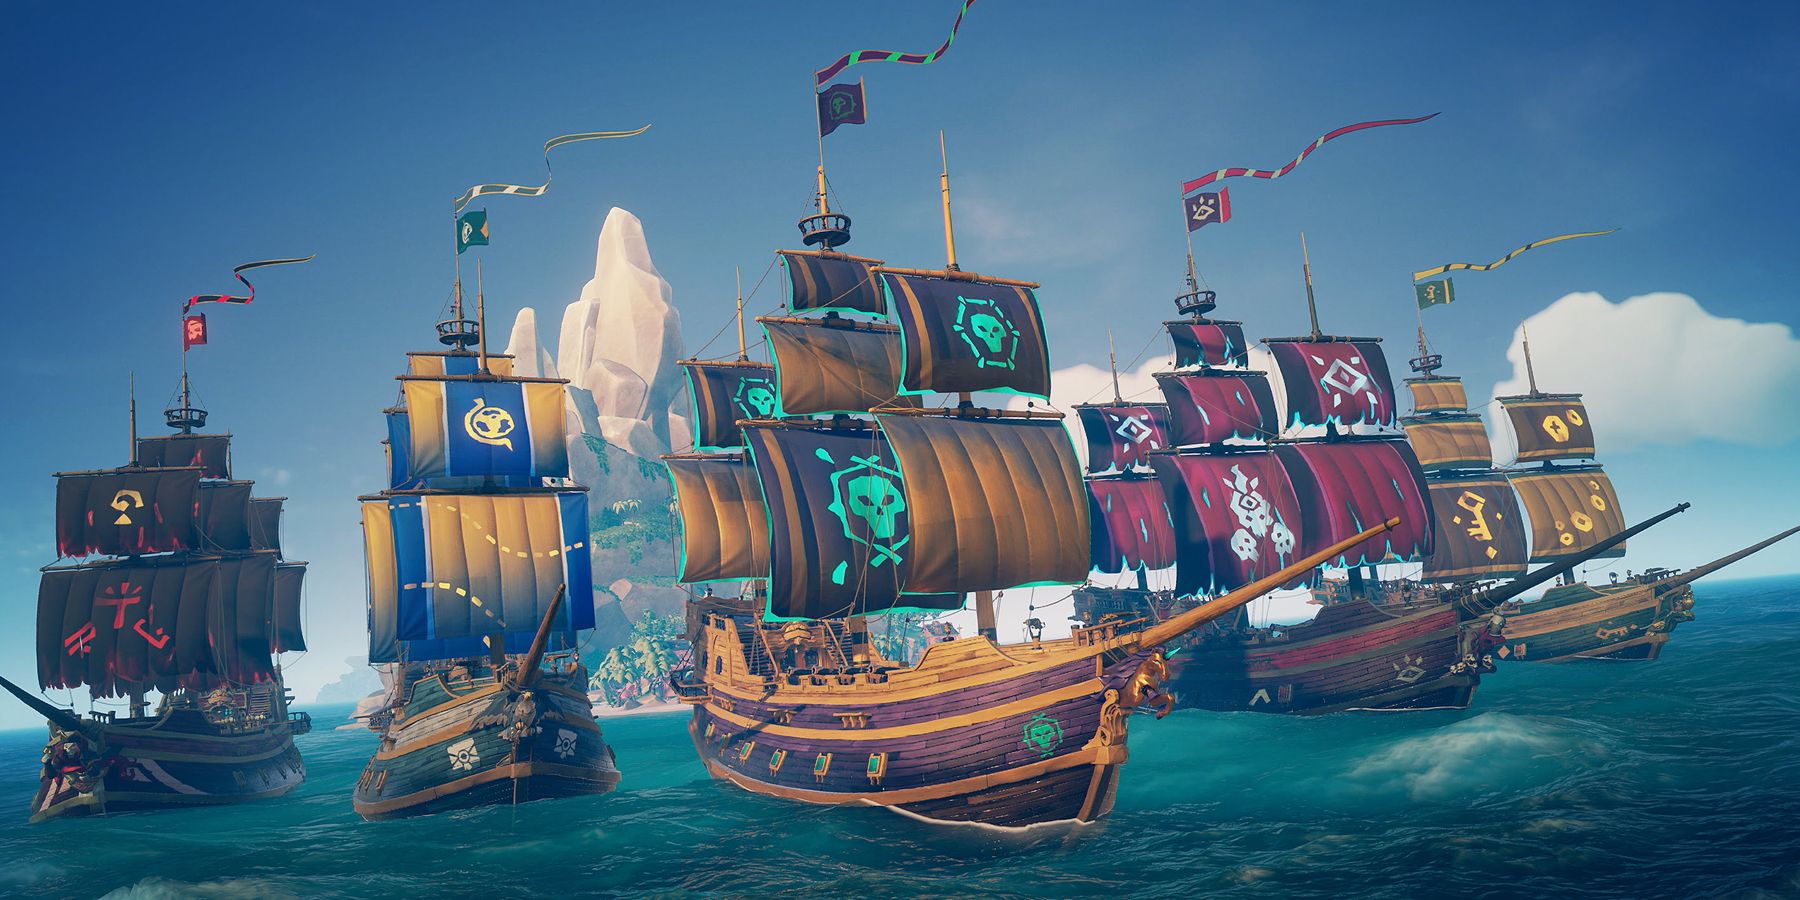 Rare Already Has Next 5 Years of Sea of Thieves Planned Out